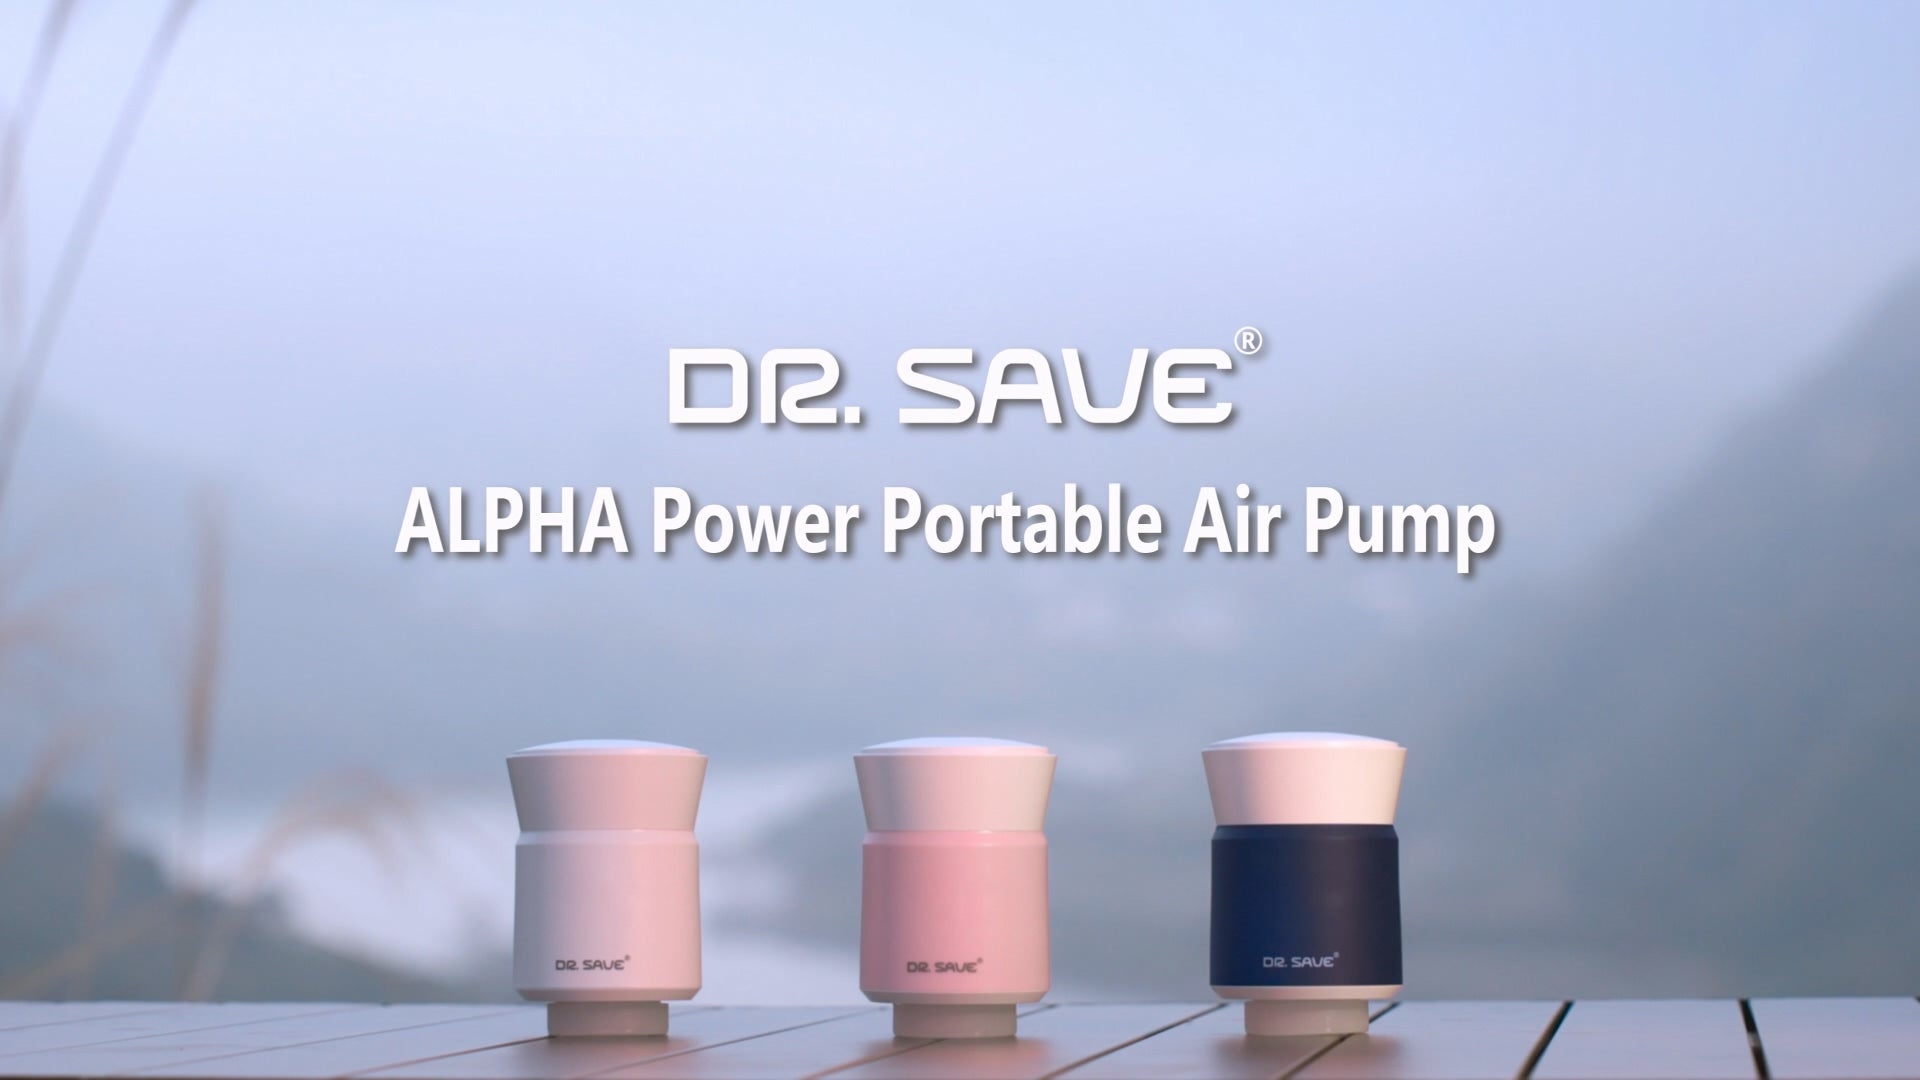 Load video: DR. SAVE ALPHA Power Portable Air Pump - 3 in 1 Multiple Function